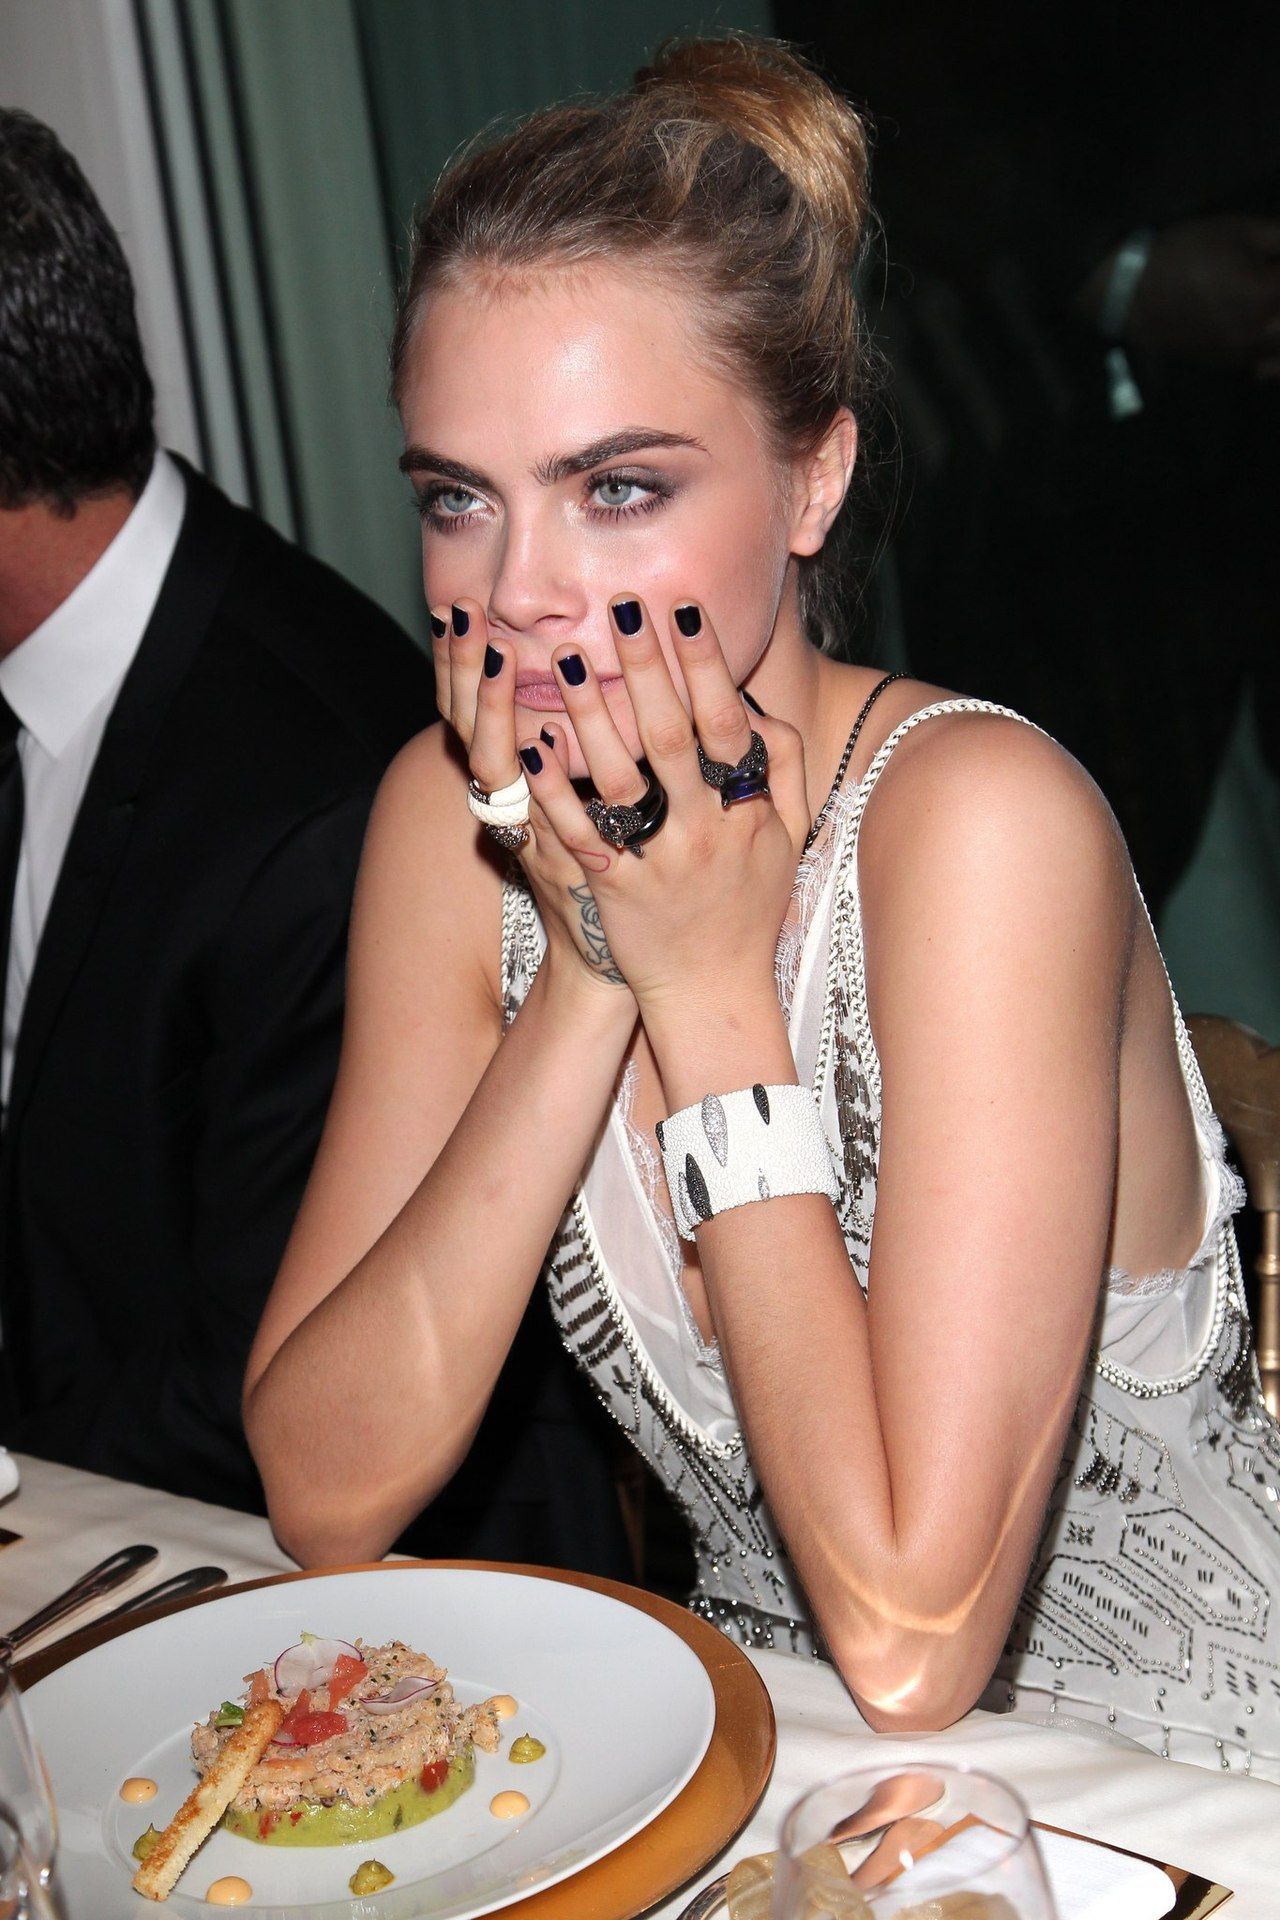 Cara Delevigne’s Iconic Eyebrows: A Bold Statement